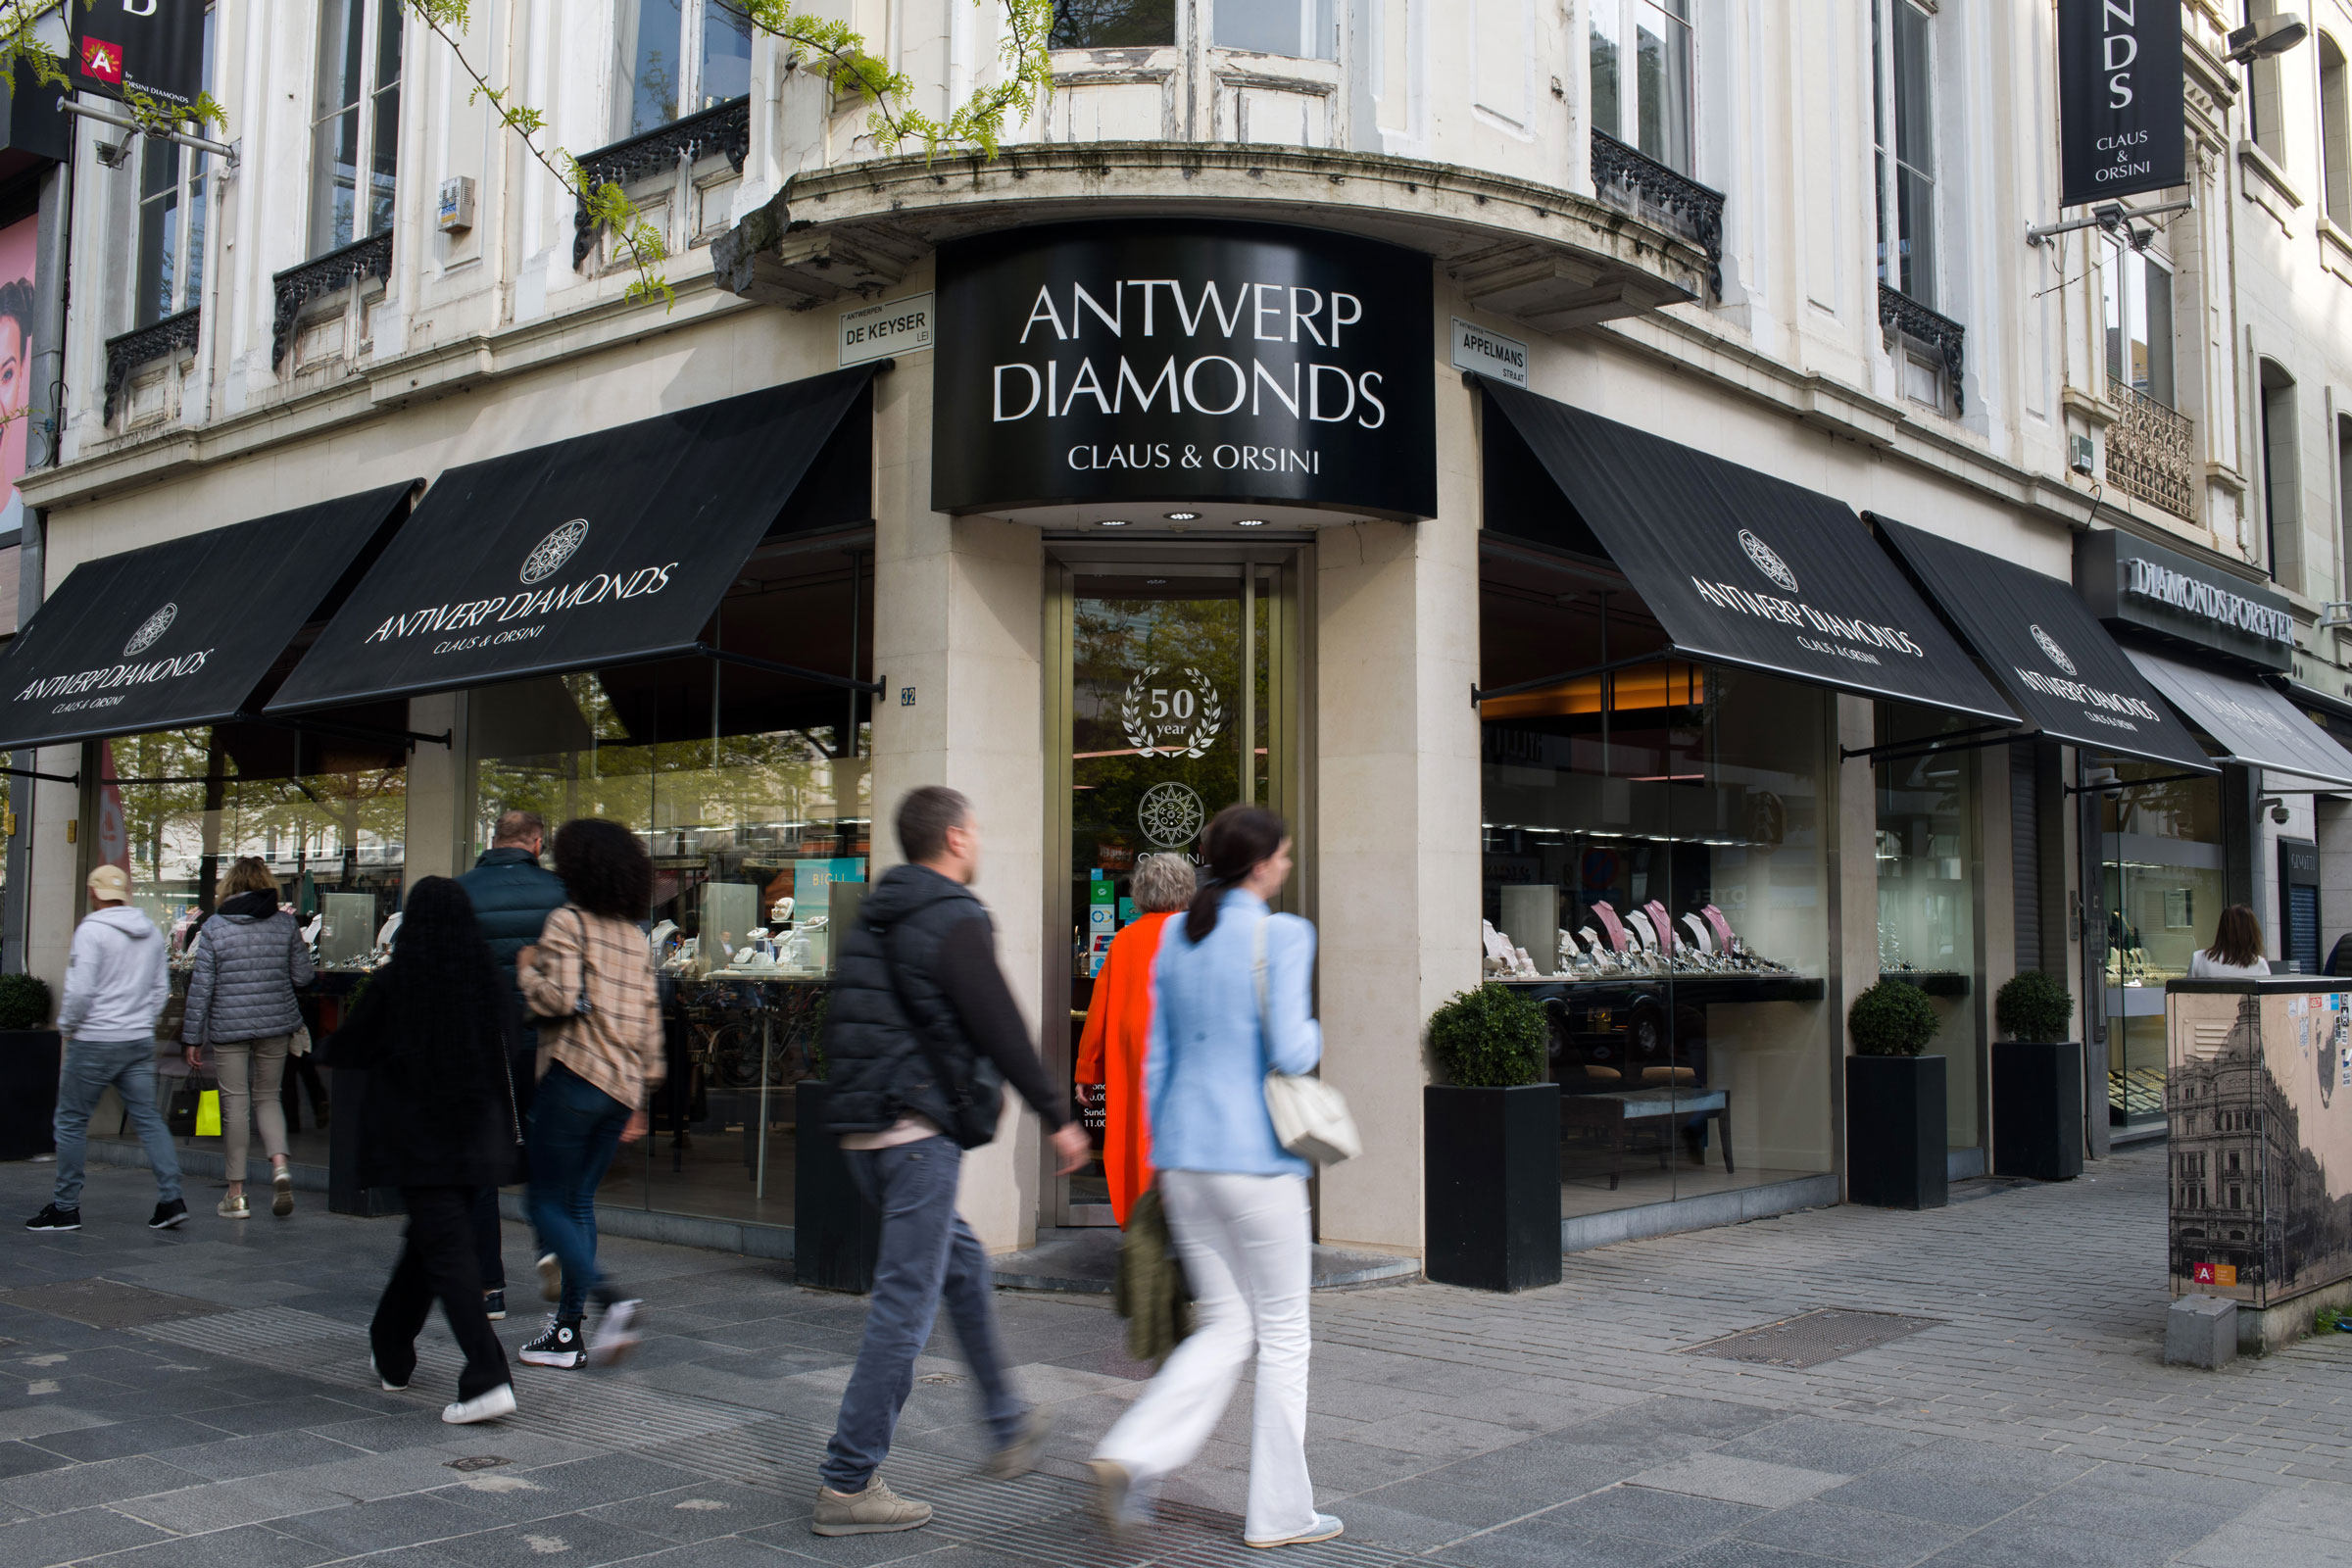 Pedestrians pass window shoppers browsing the Orsini Diamonds store in the Diamond Quarter of Antwerp, Belgium, on April 28. (Nathan Laine—Bloomberg/Getty Images)